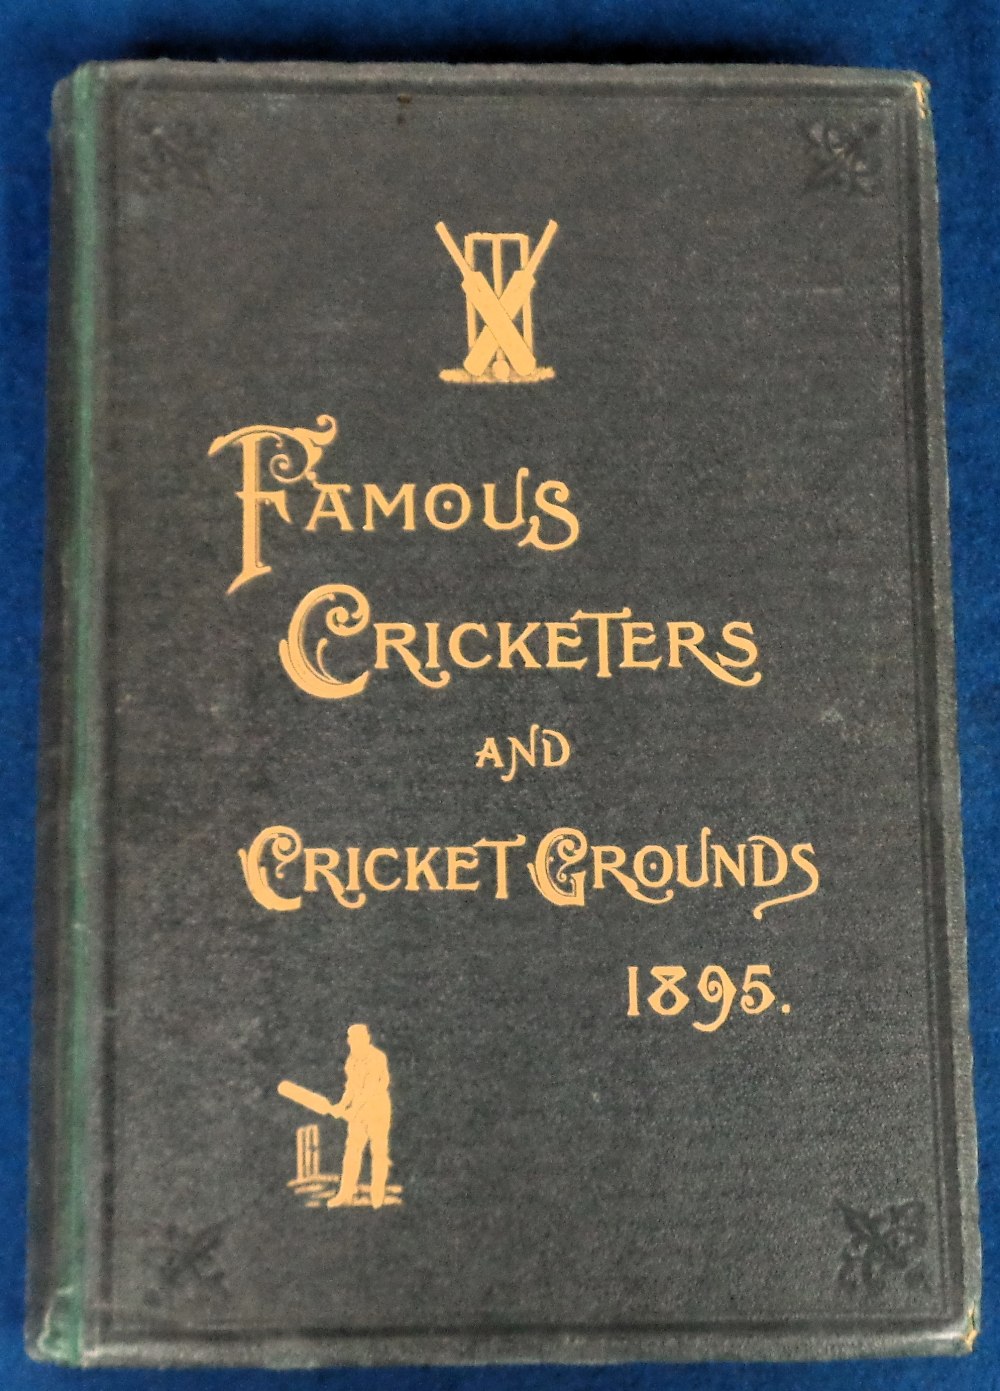 Cricket book, 'Famous Cricketers and Cricket Grounds 1895' by C W Allcock published by Hudson &